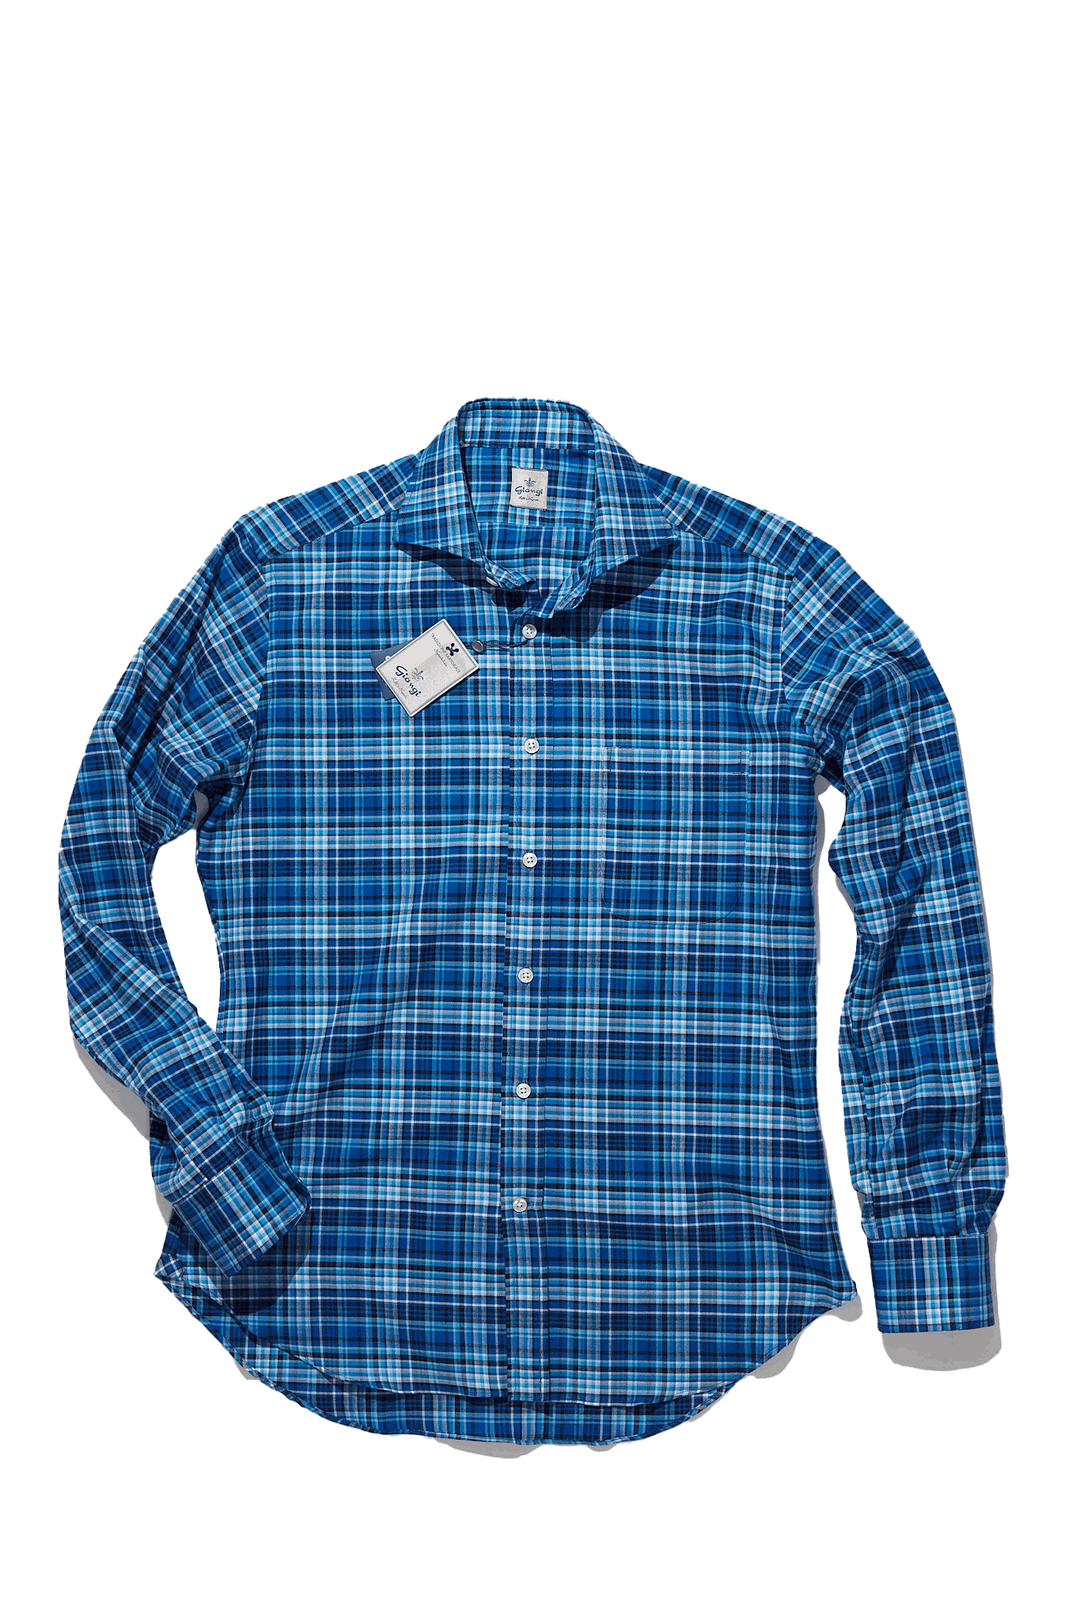 Giangi Sky Blue and Navy Plaid Flannel